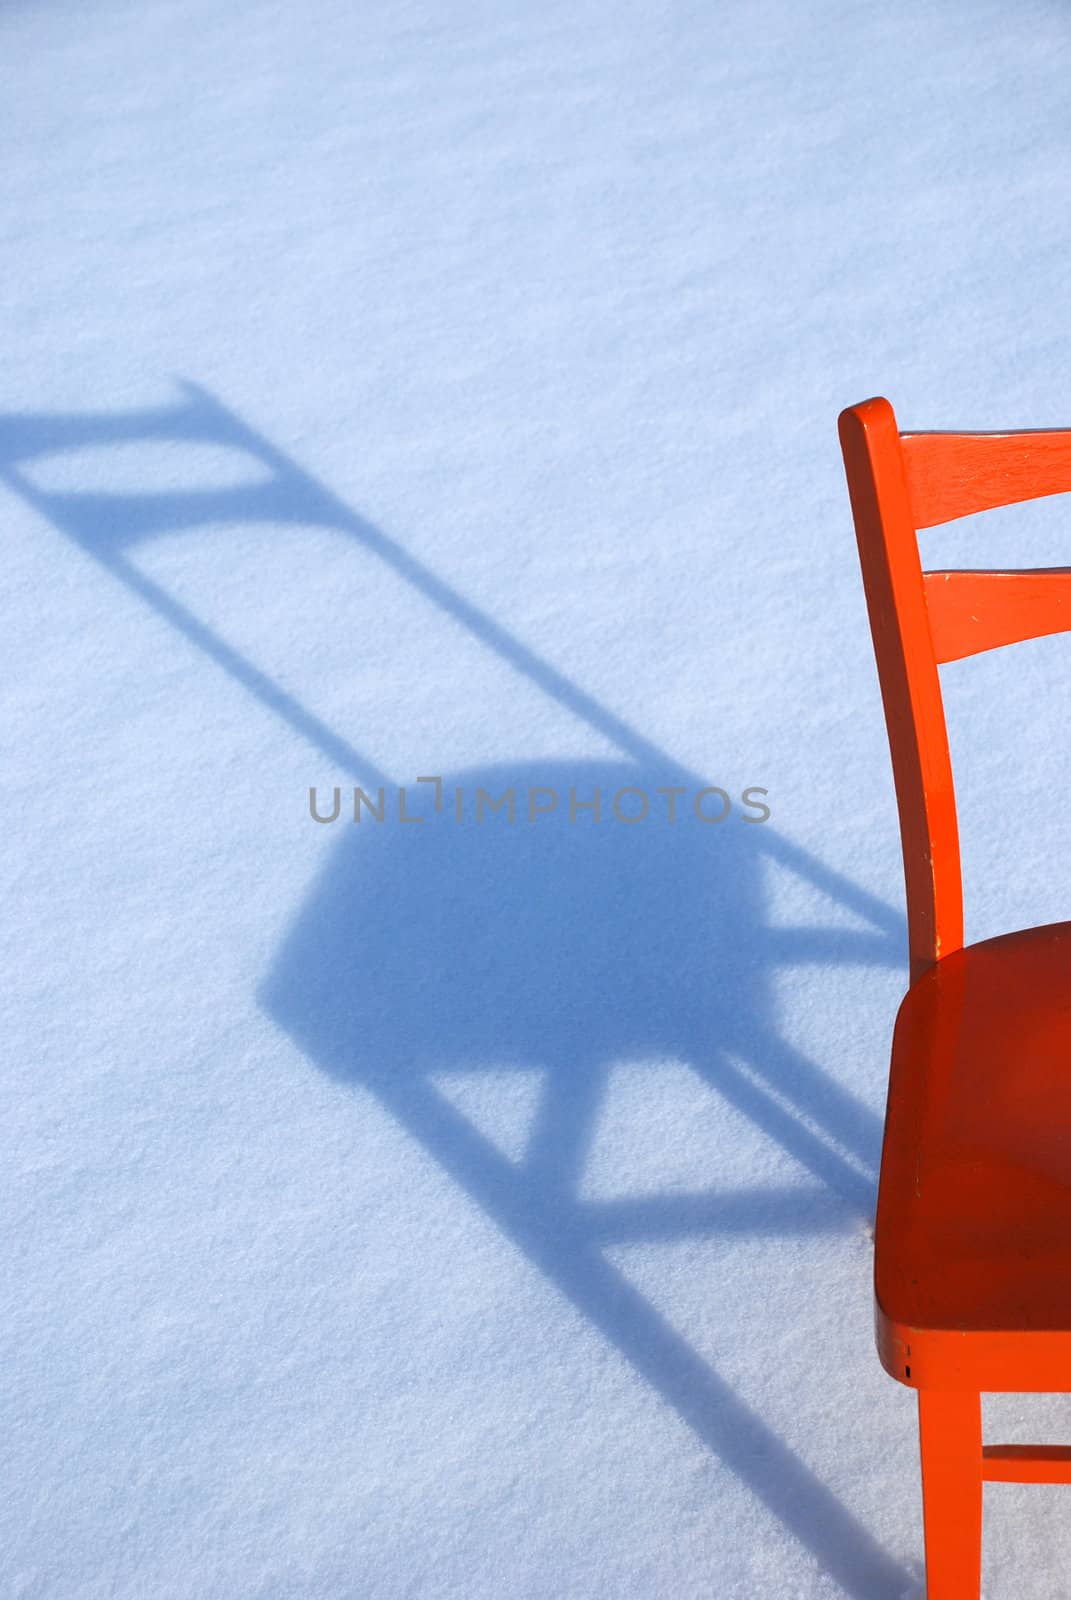 The orange chair and its shadow on the snow